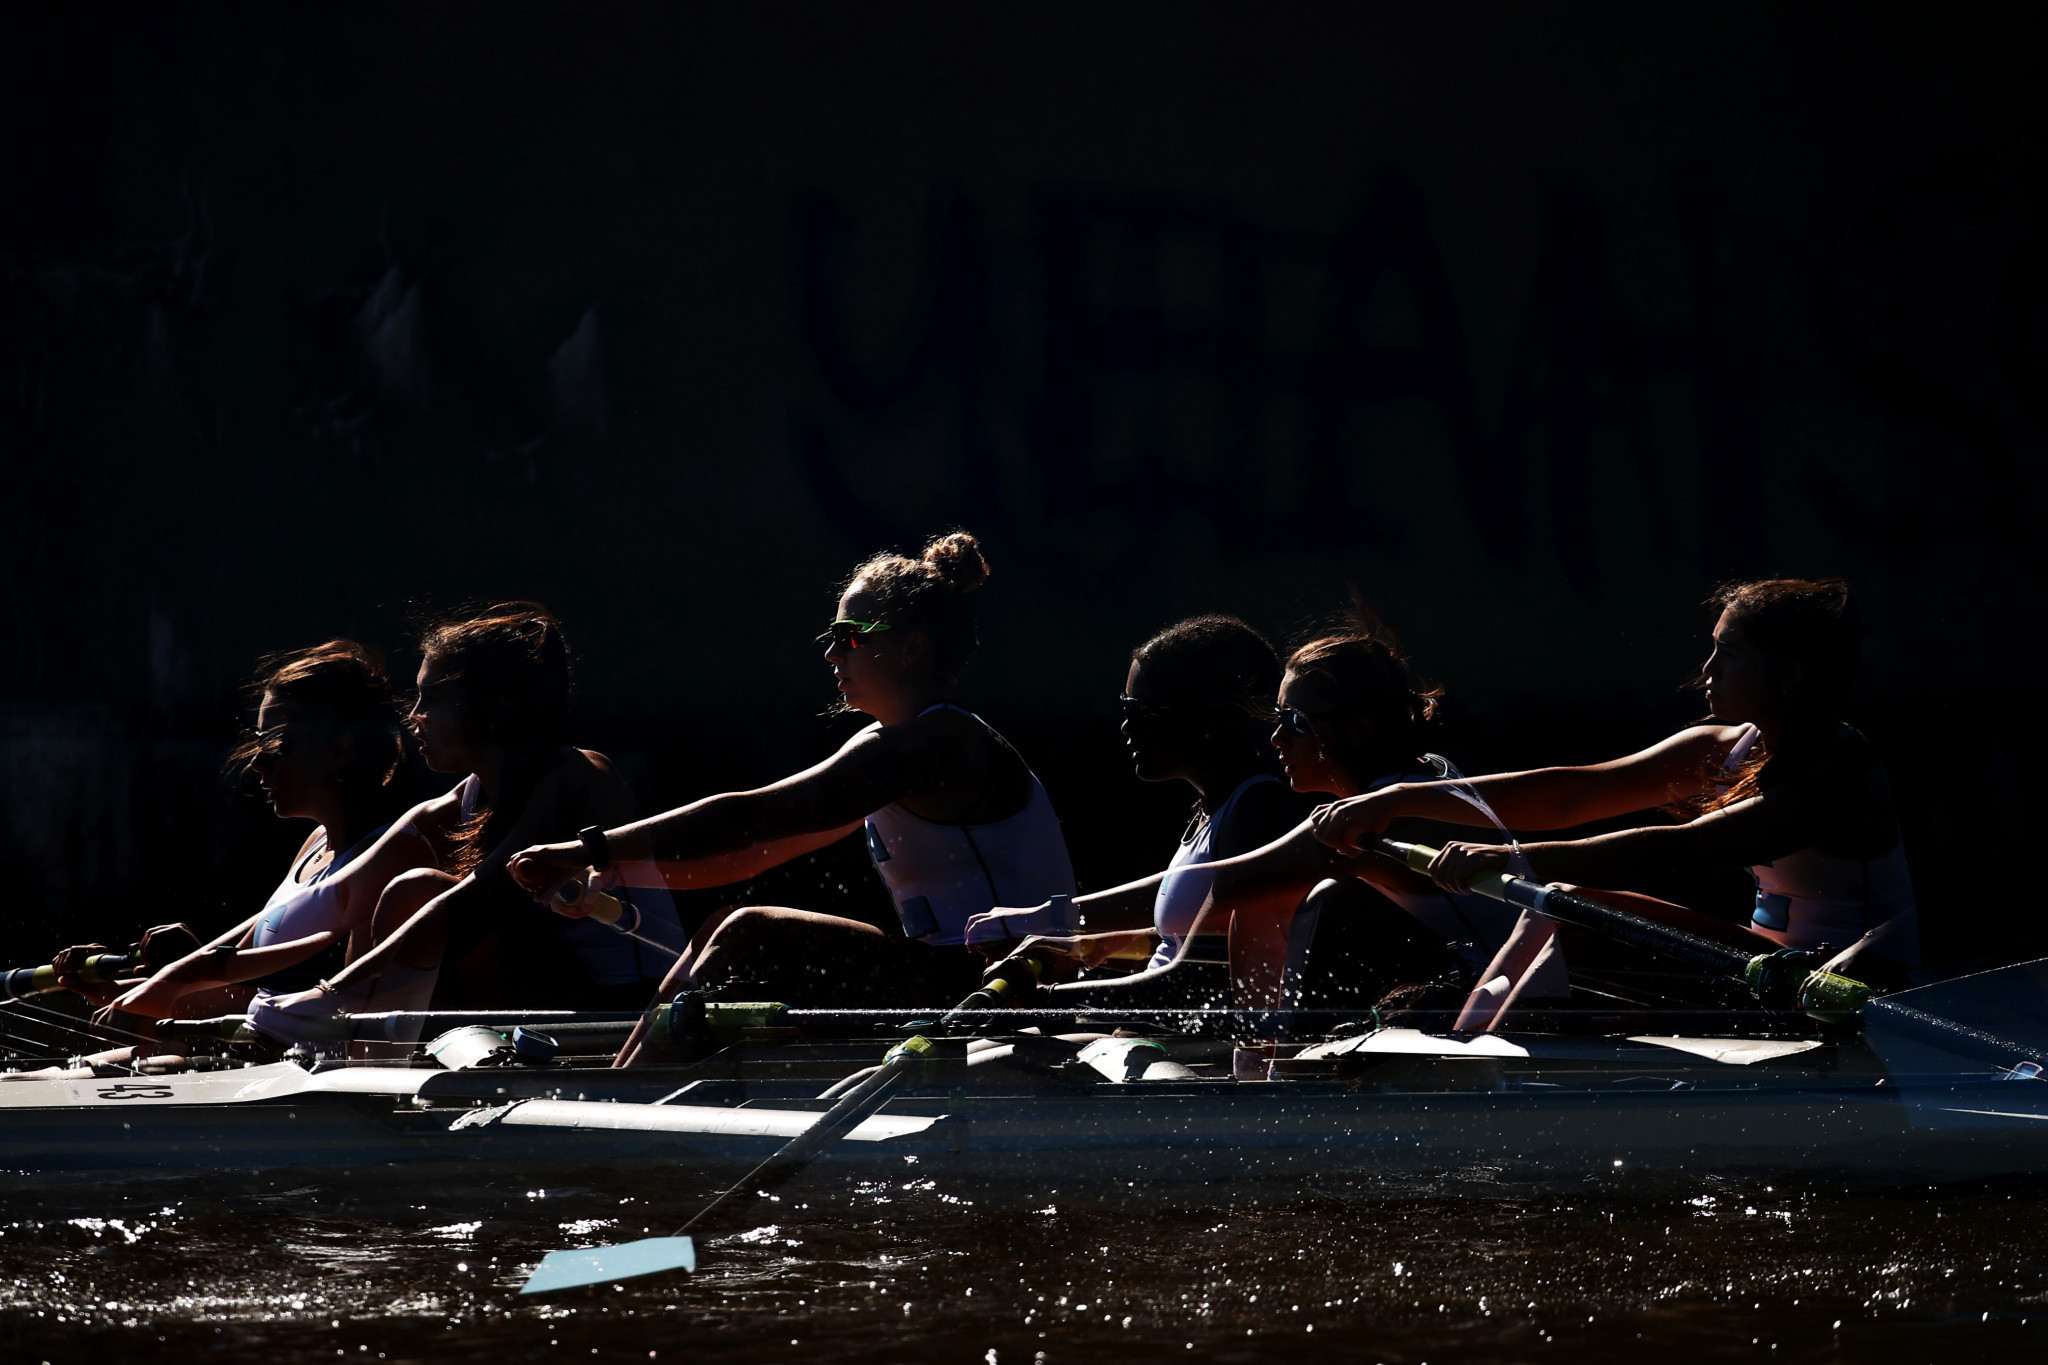 Sabaudia withdraws from hosting two major rowing events